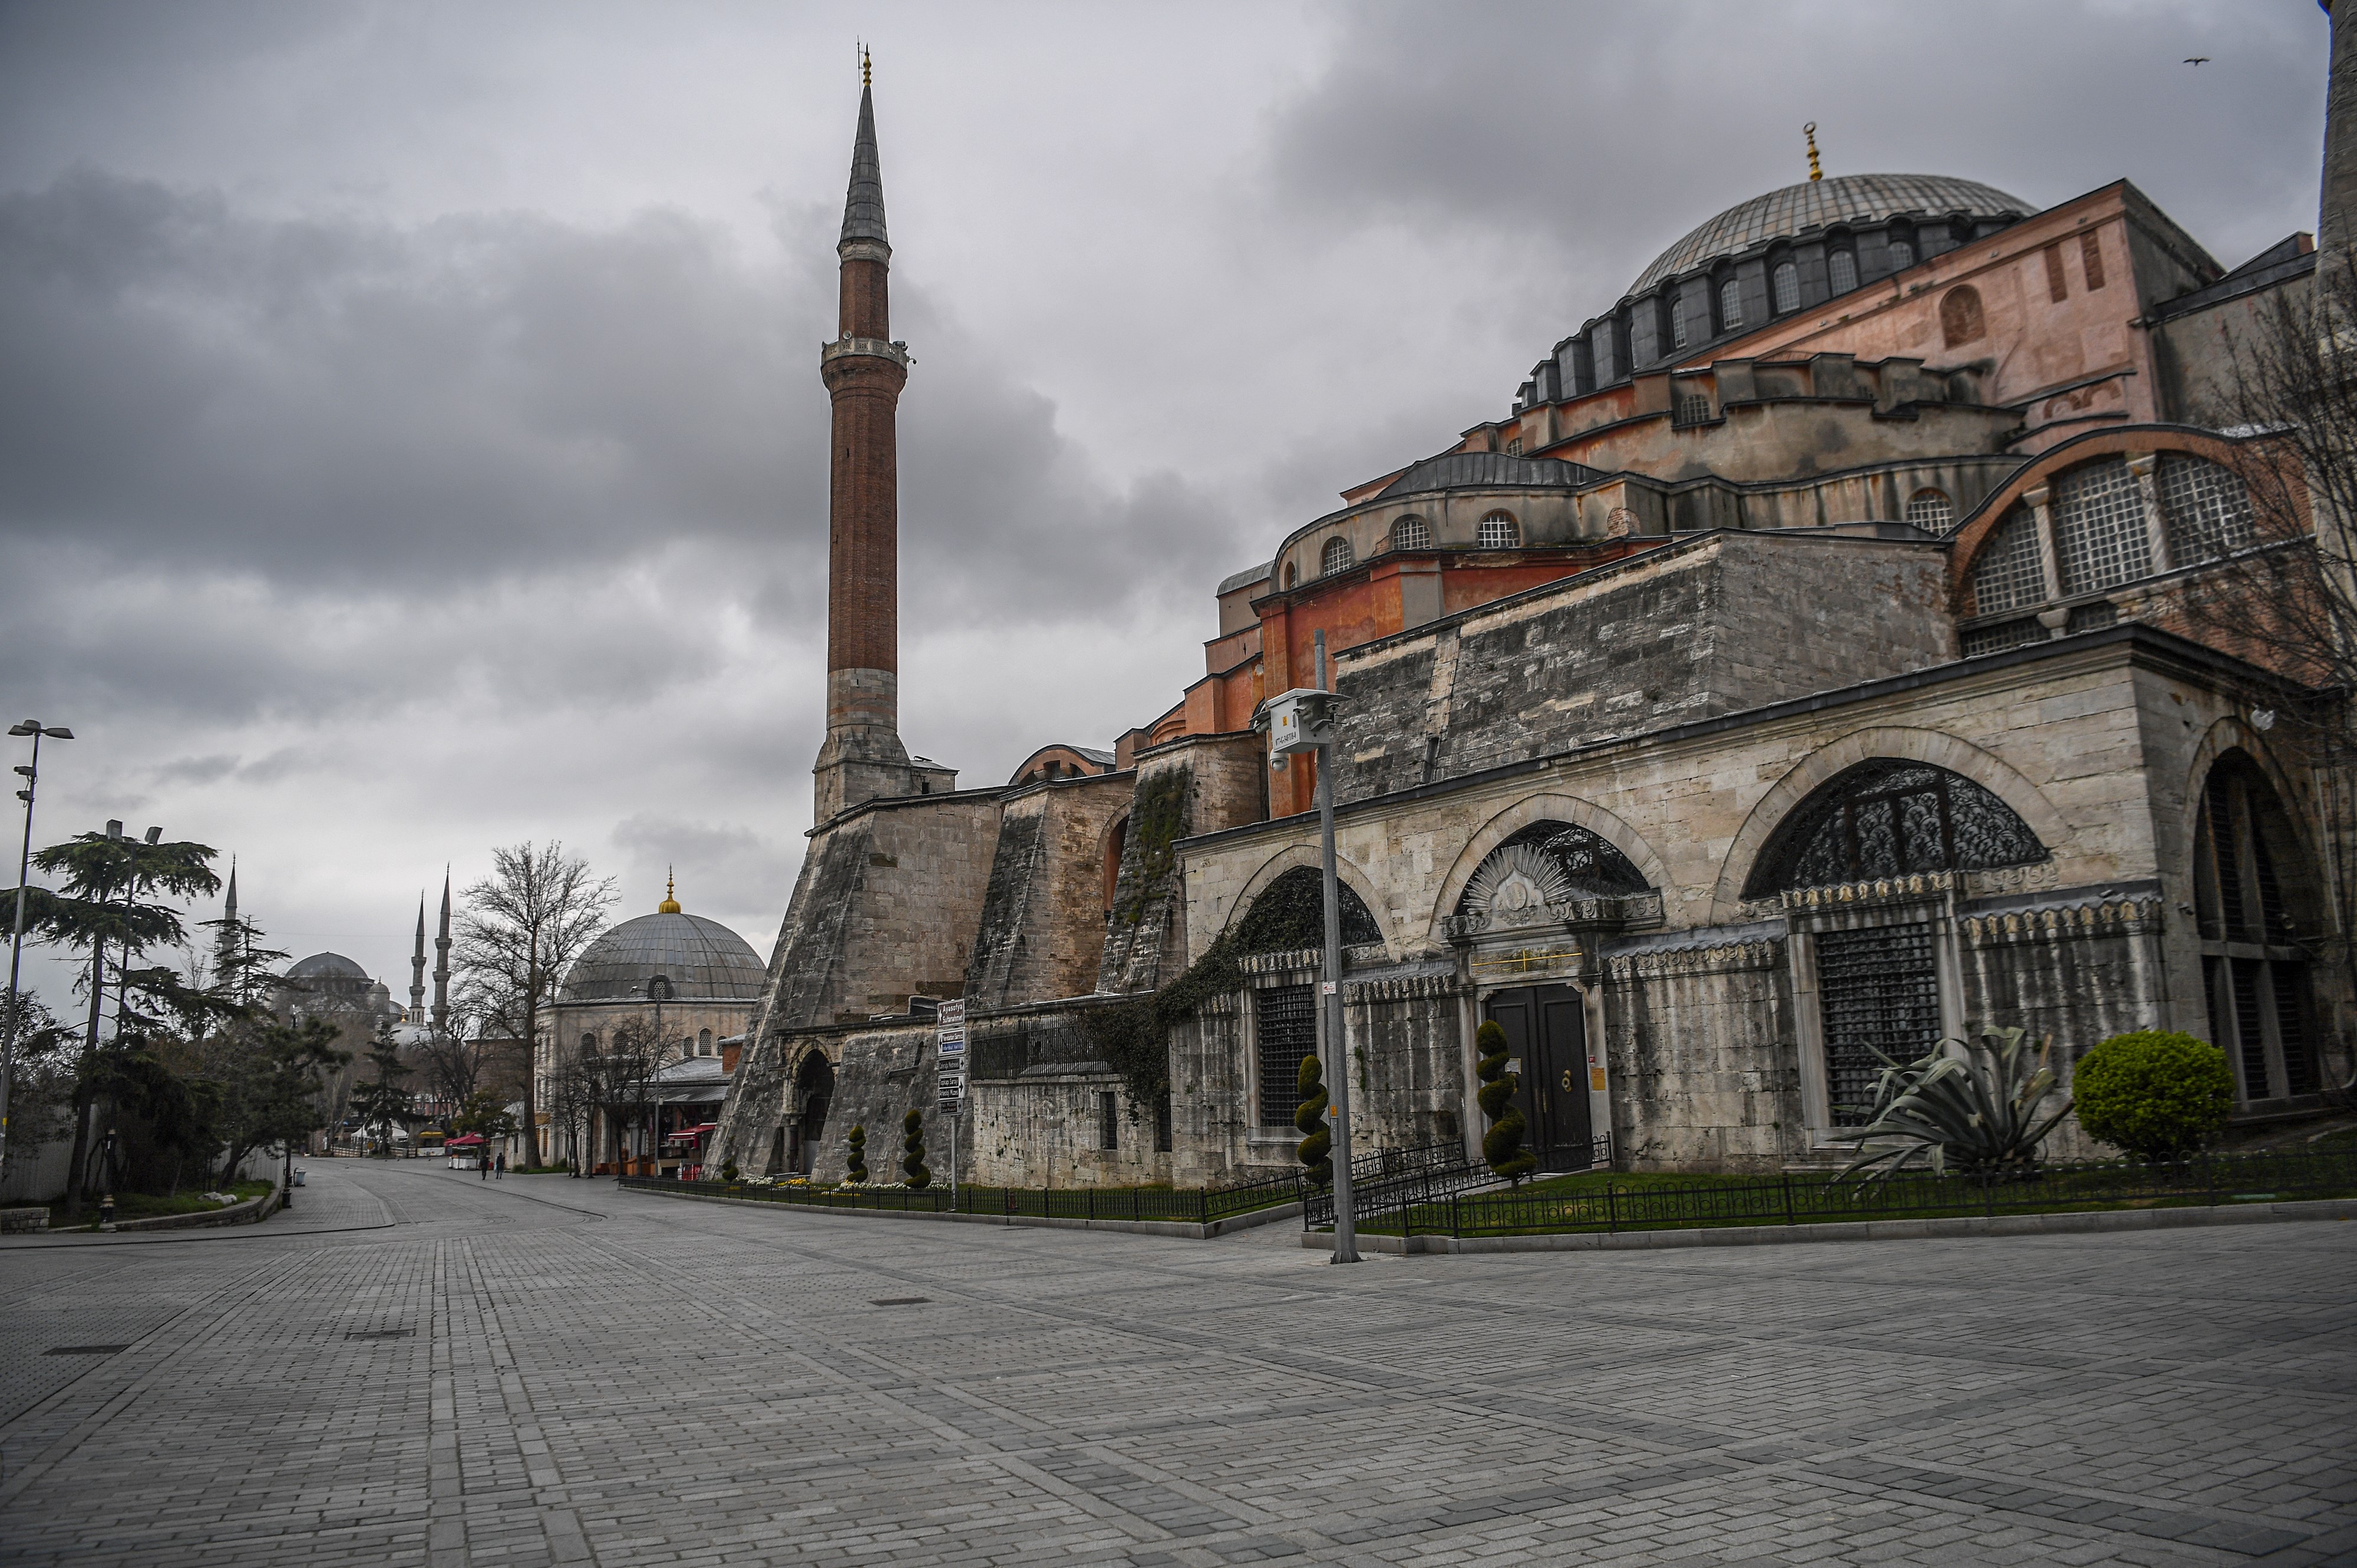 A picture taken on April 1, 2020 shows the empty streets by the iconic Hagia Sophia in Istanbul after Turkish officials have repeatedly urged citizens to stay home and respect social distancing rules. - (Photo by OZAN KOSE/AFP via Getty Images)